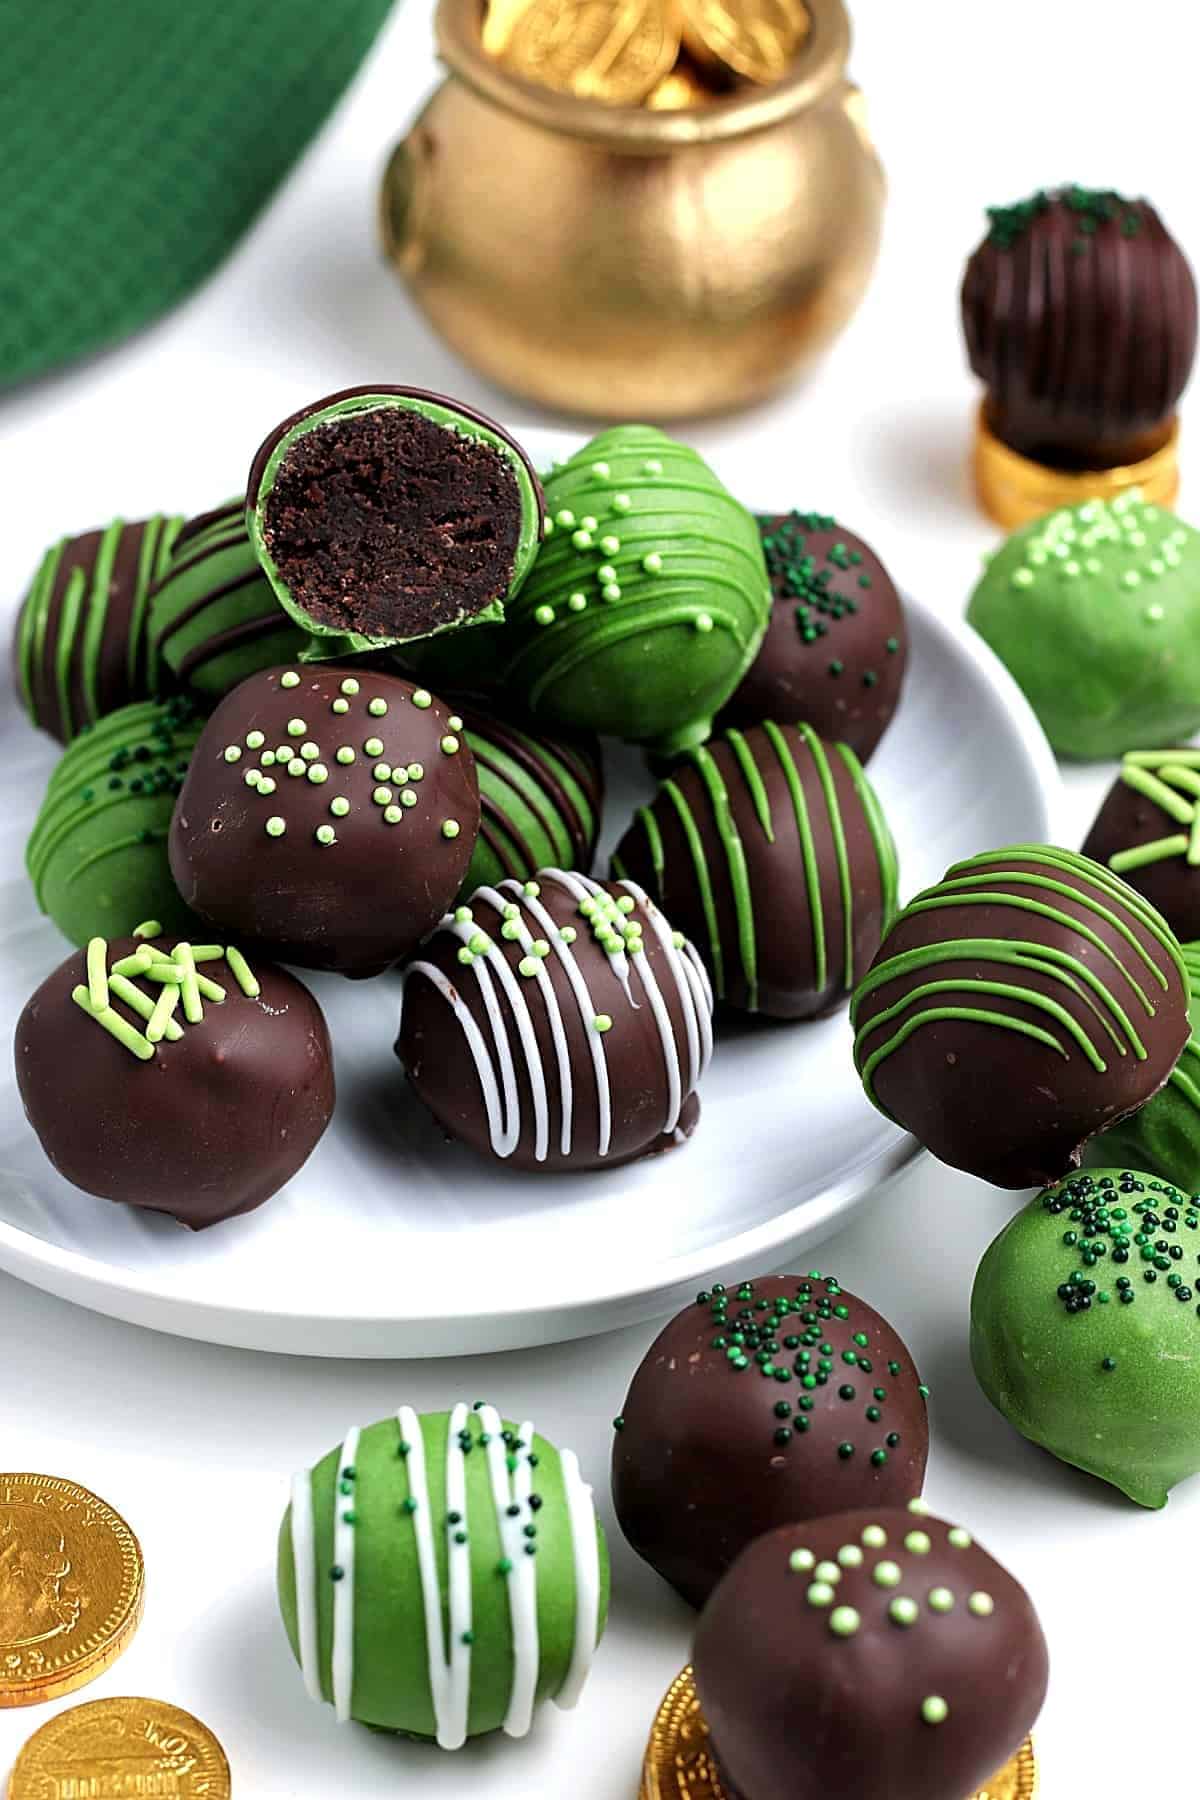 Piles of chocolate and green candy treats decorated for St. Patrick's day.